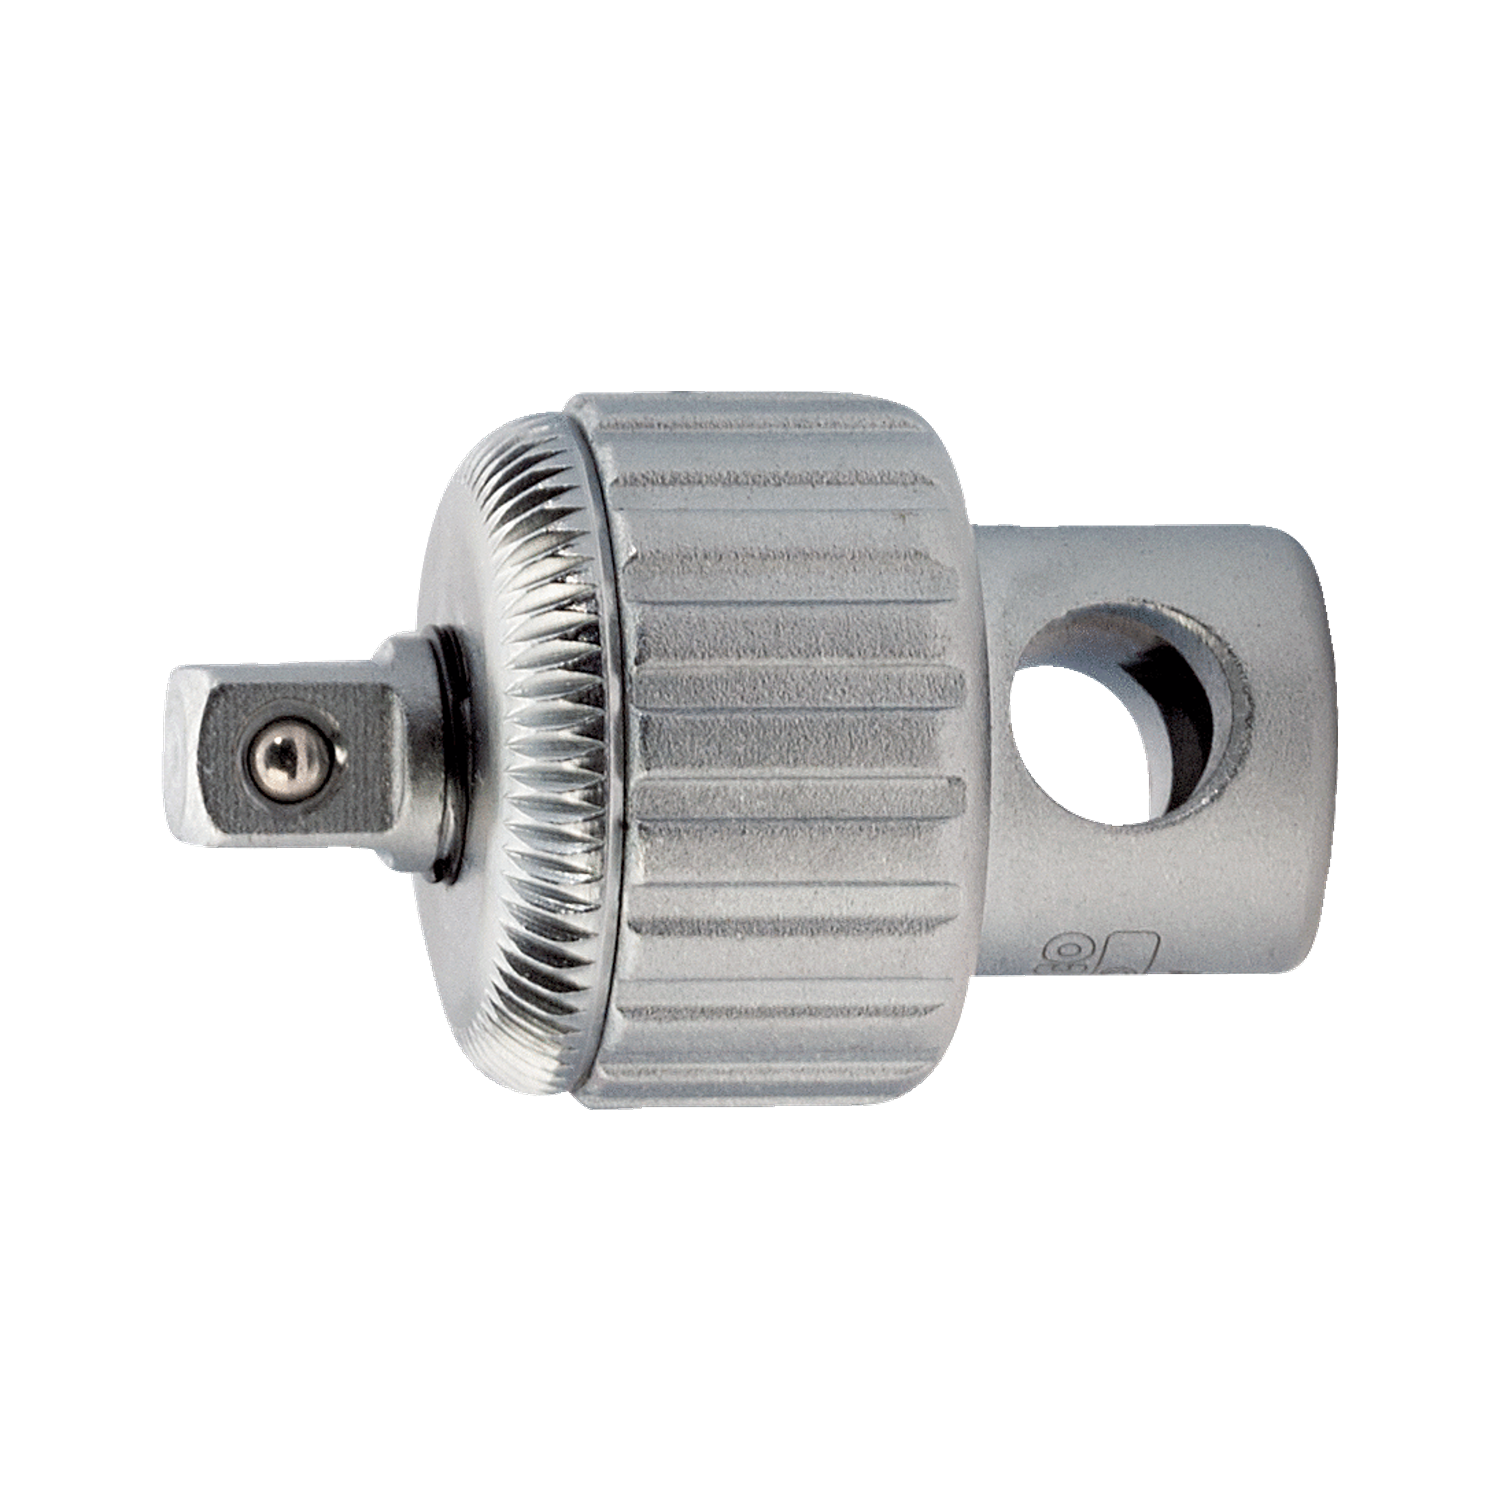 BAHCO 6951 Ratcheting Adaptor with 52 Teeth for 1/4" Ratchet - Premium Ratcheting Adaptor from BAHCO - Shop now at Yew Aik.